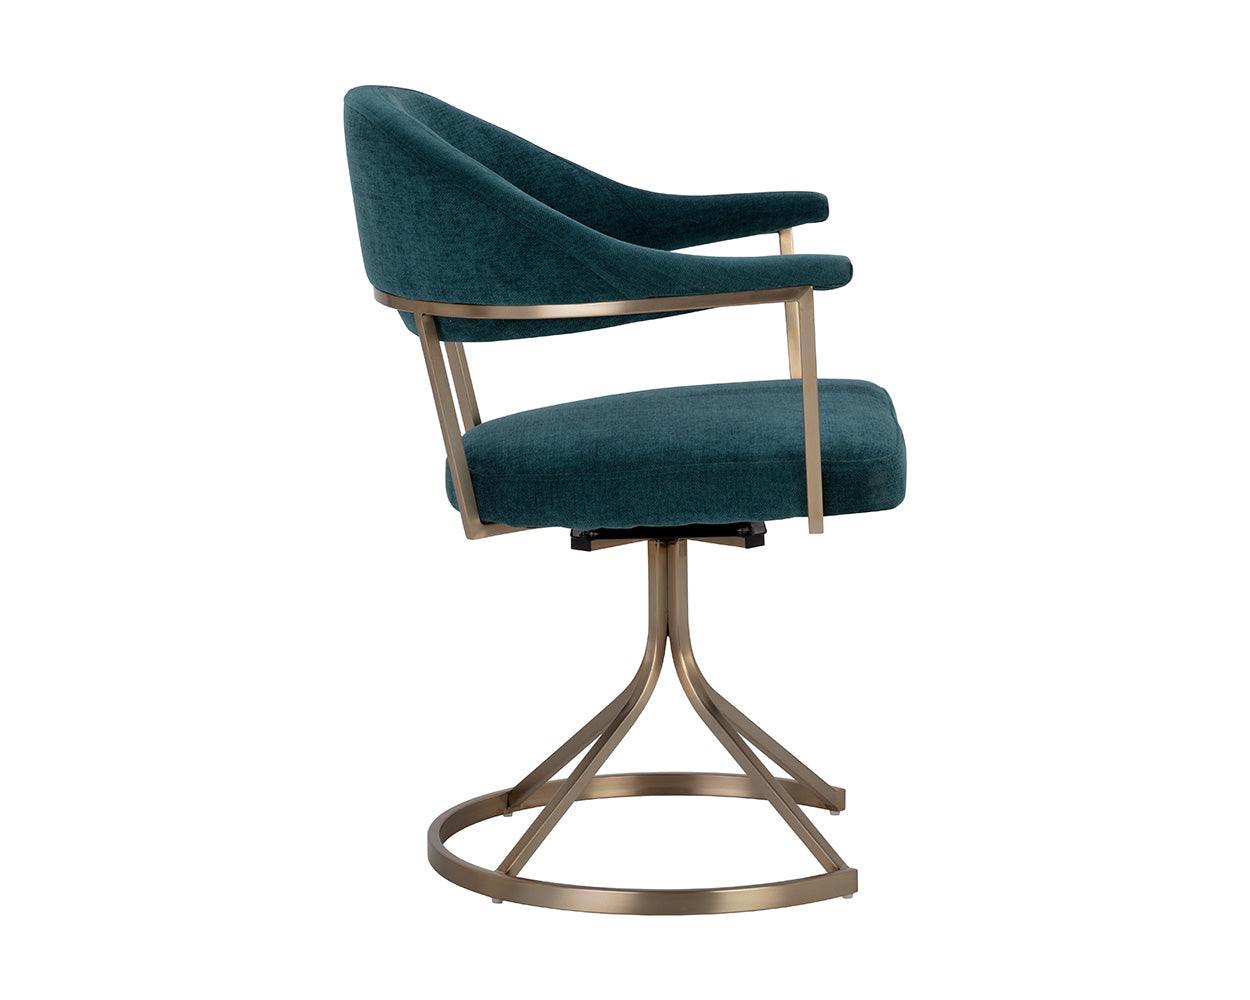 Bexley Swivel Dining Chair